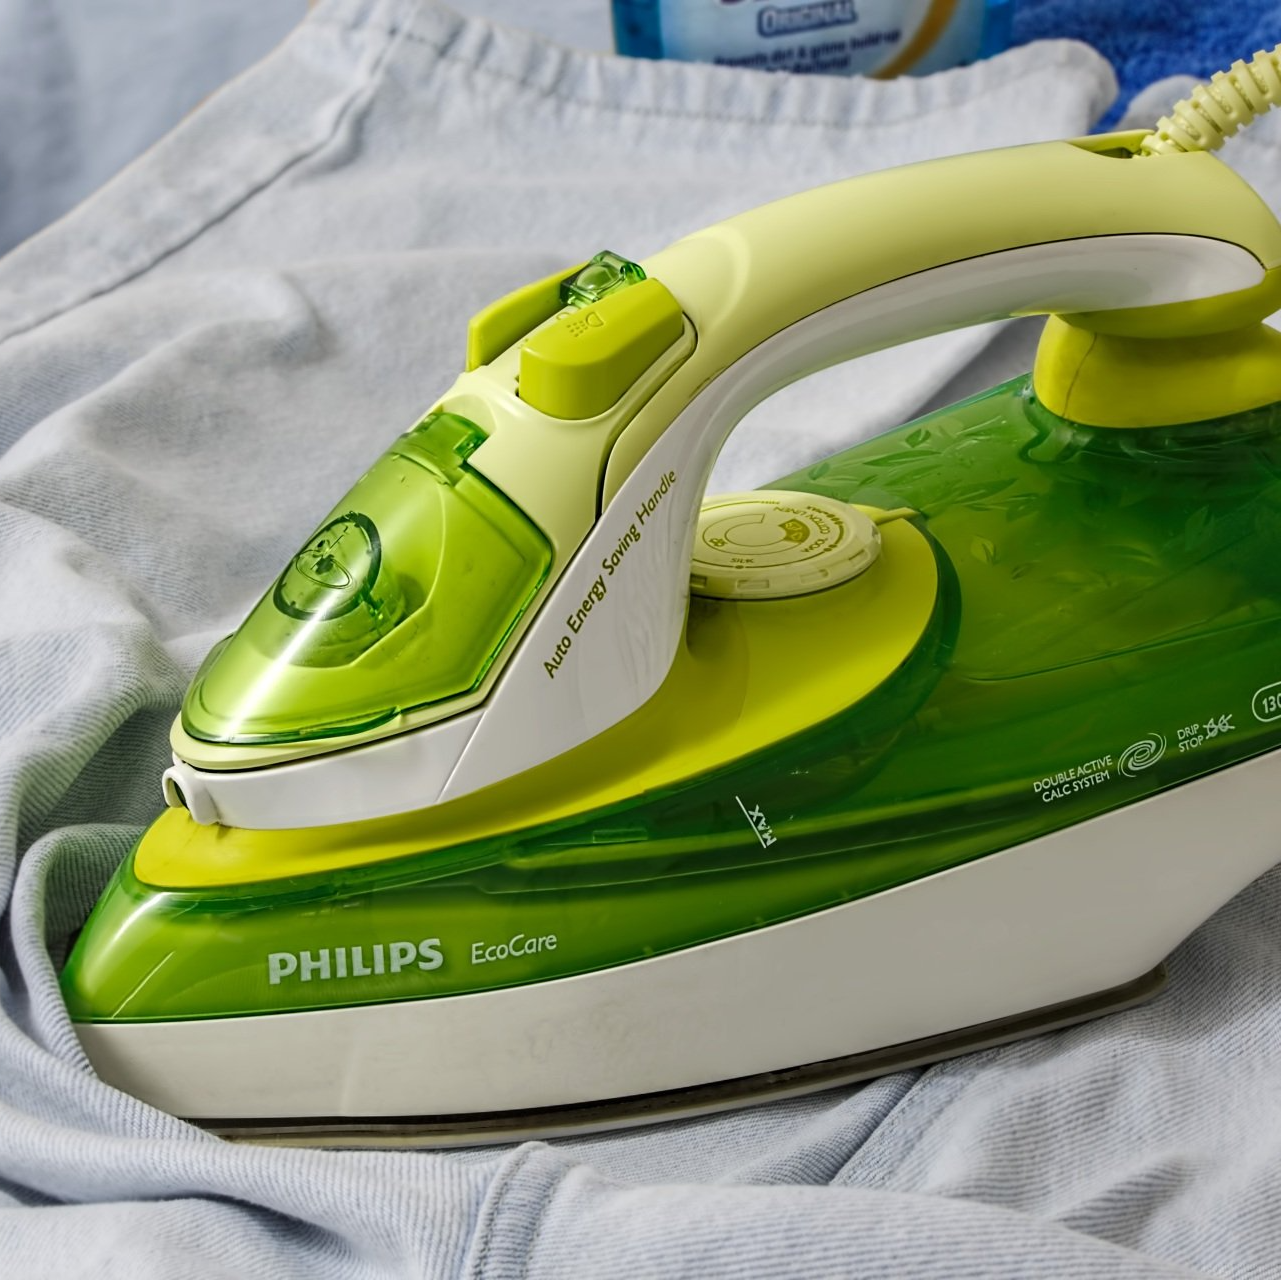 a green and white philips iron is sitting on a shirt